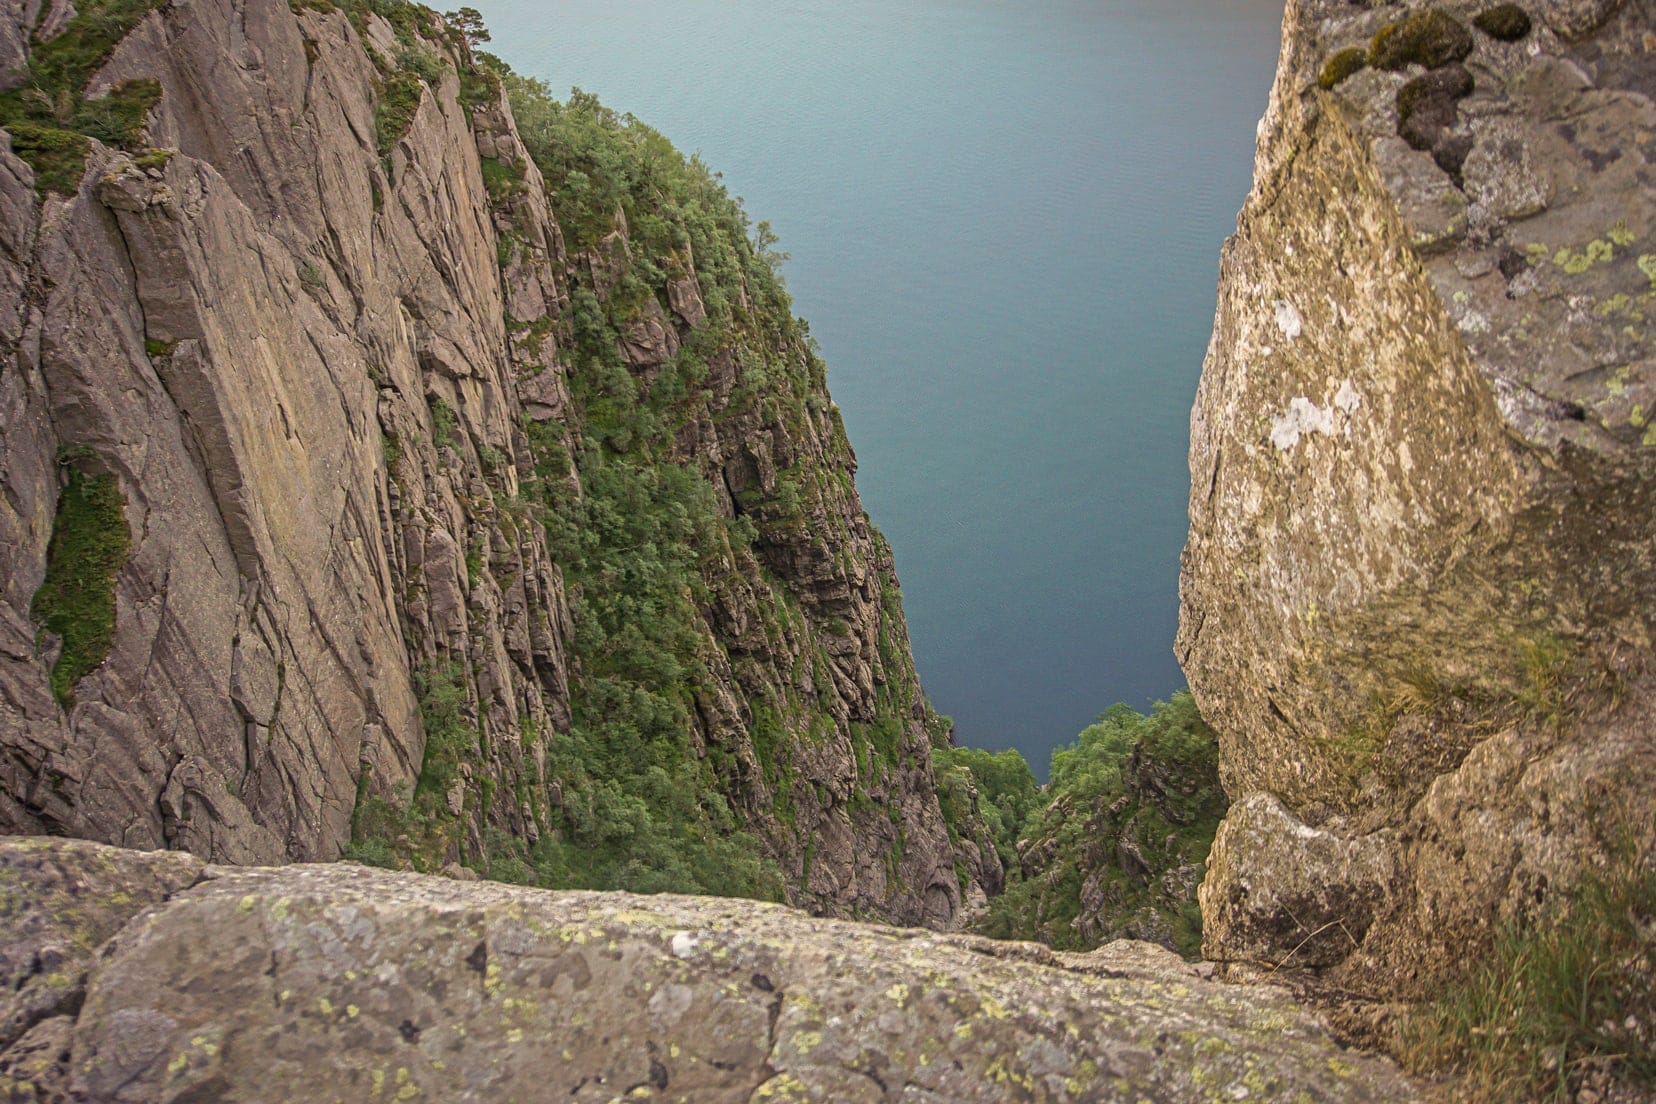 View over the edge of a cliff at a 600m drop into a fjord_Pulpit Rock